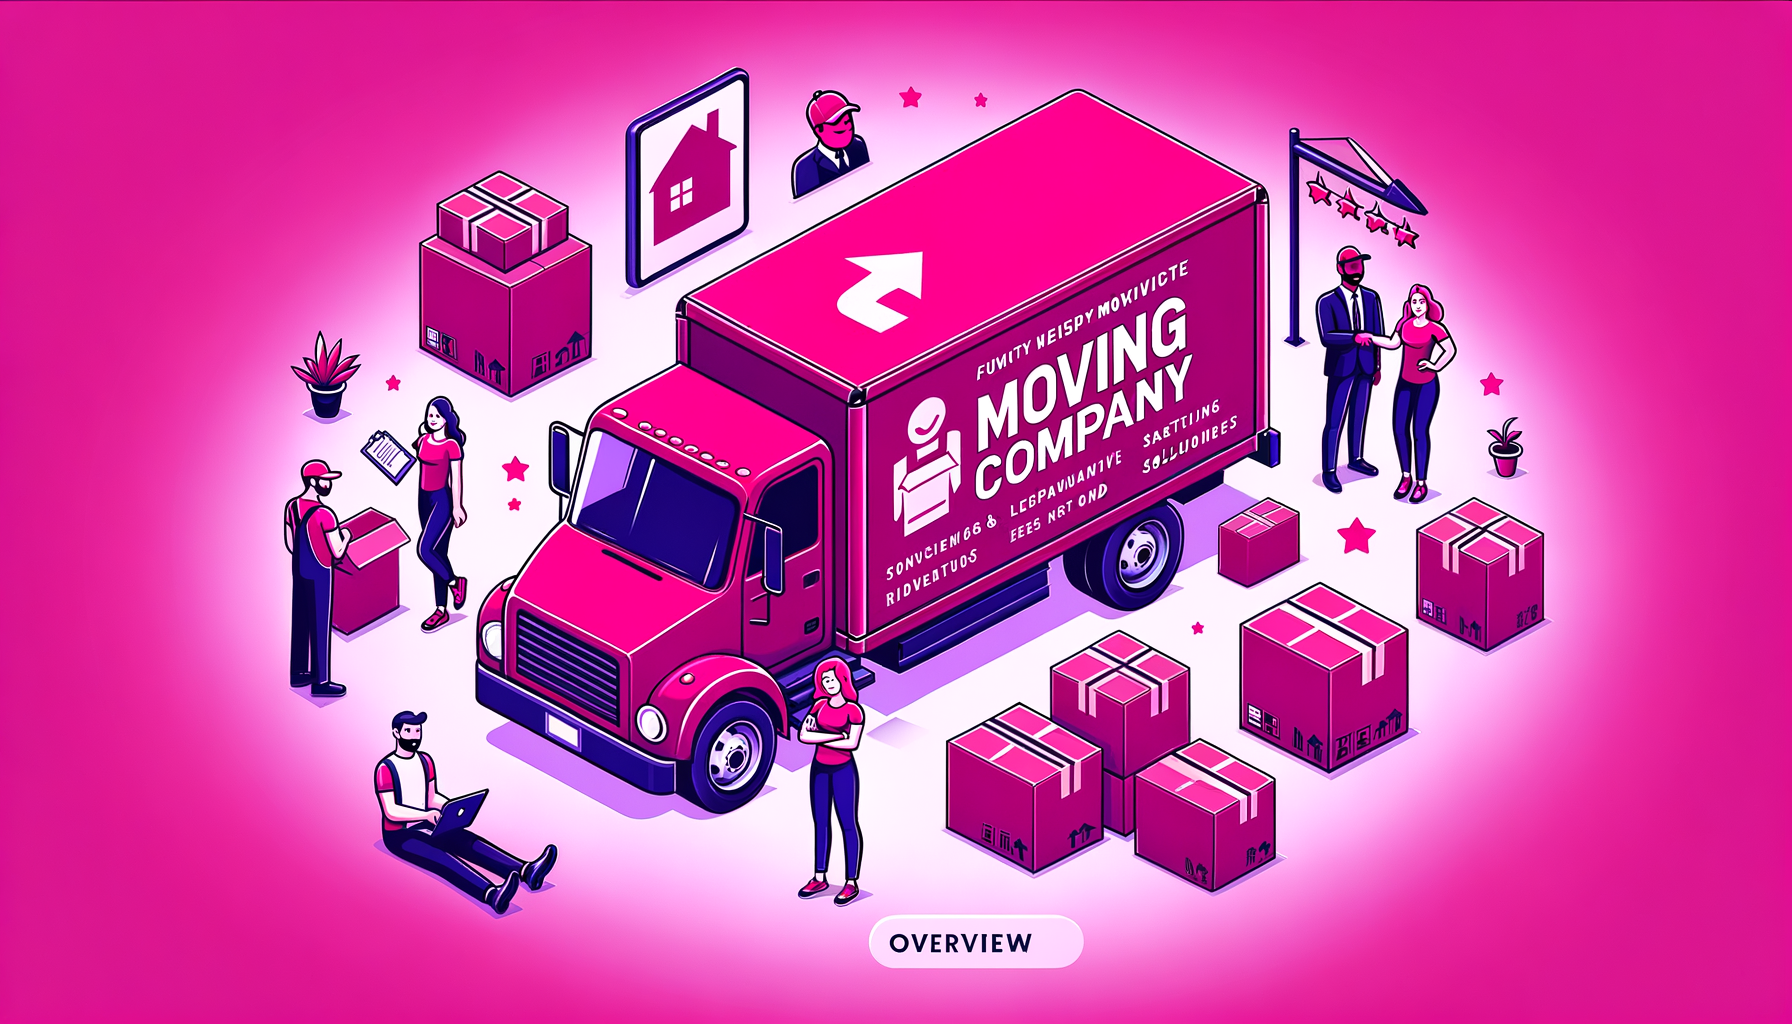 Cartoon illustration of a bright fuschia moving truck with "JK Moving Services" logo, surrounded by packed boxes and happy customers, symbolizing a comprehensive moving solution.